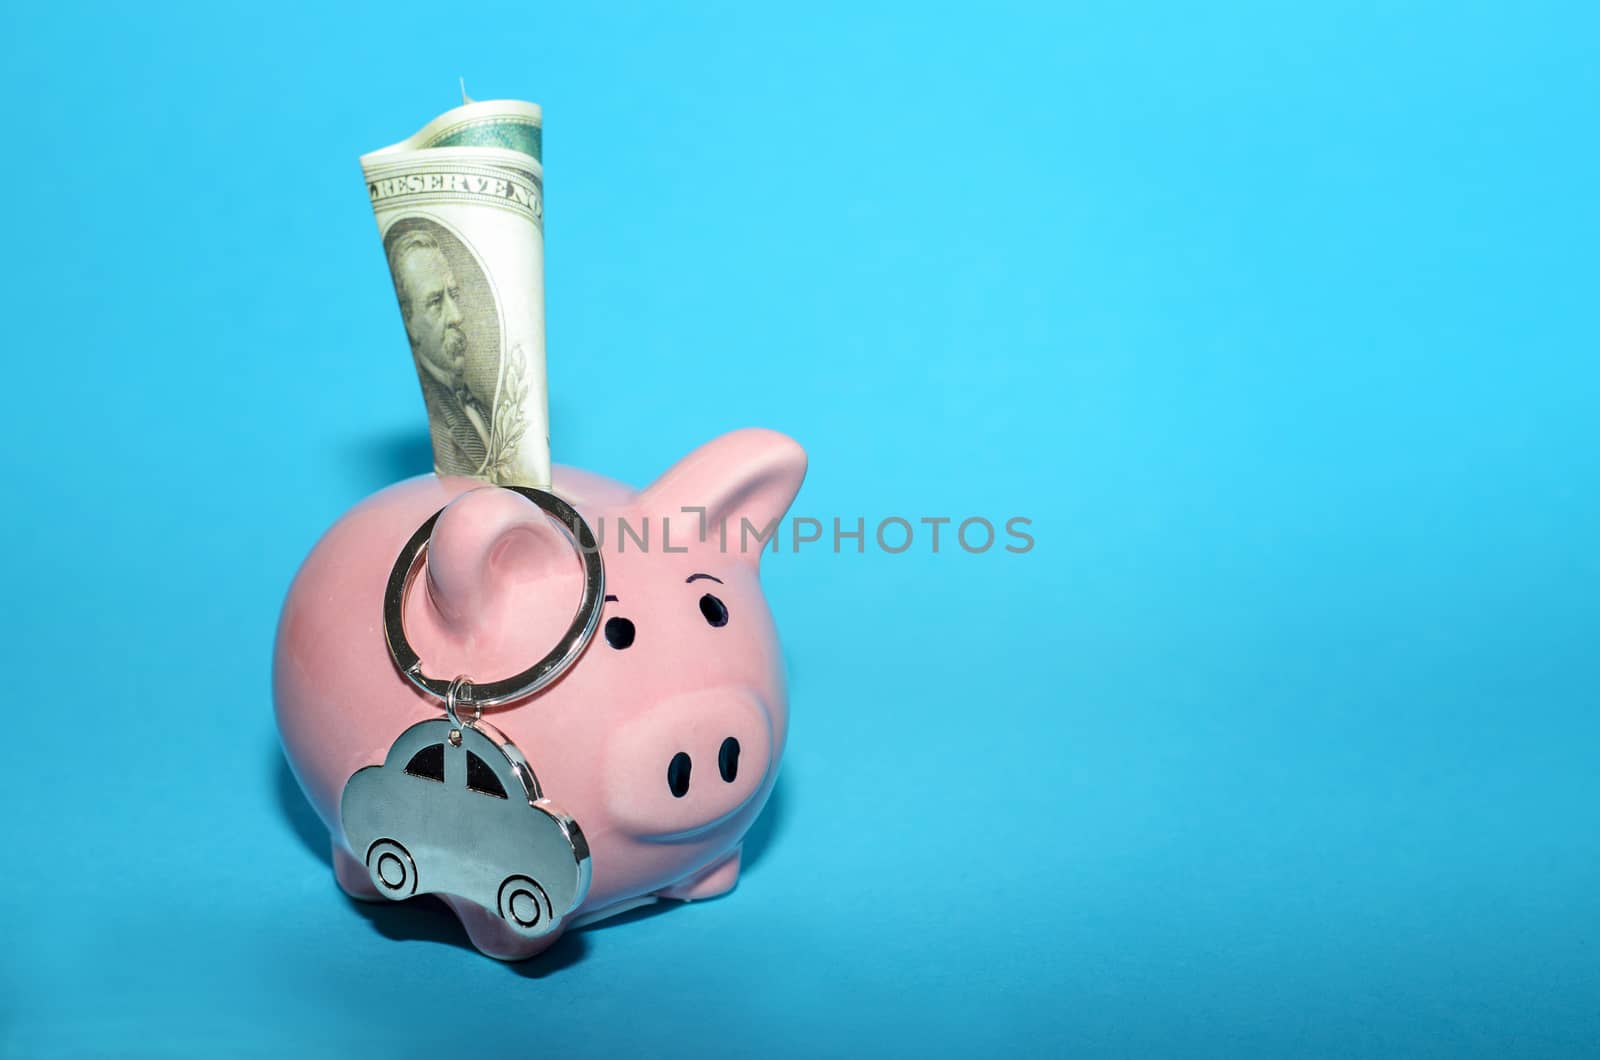 Pink piggy bank with a car on the table. Tinted. Concept of saving finances and contributions to property